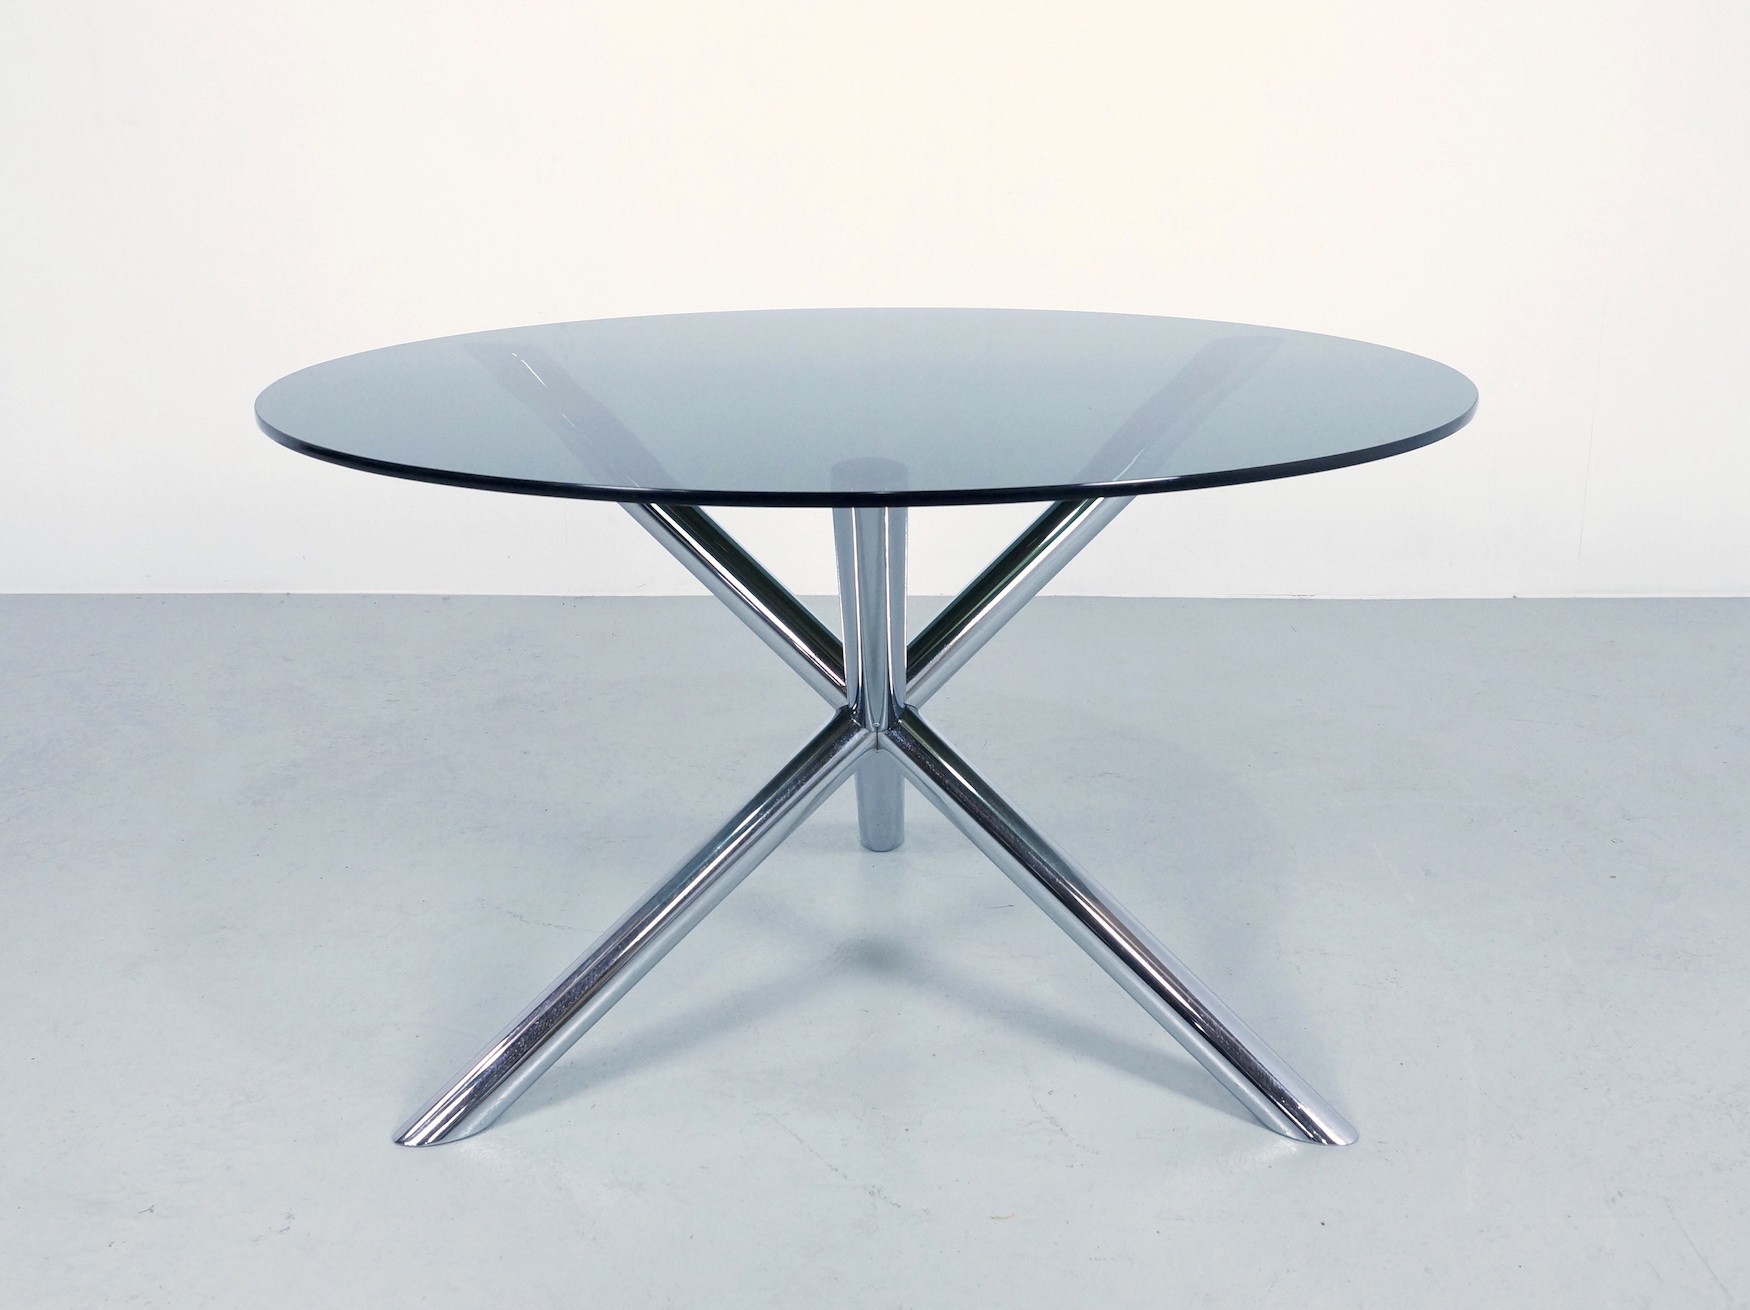 Roche Bobois dining table in chromed metal and smoked glass - 1970s ...